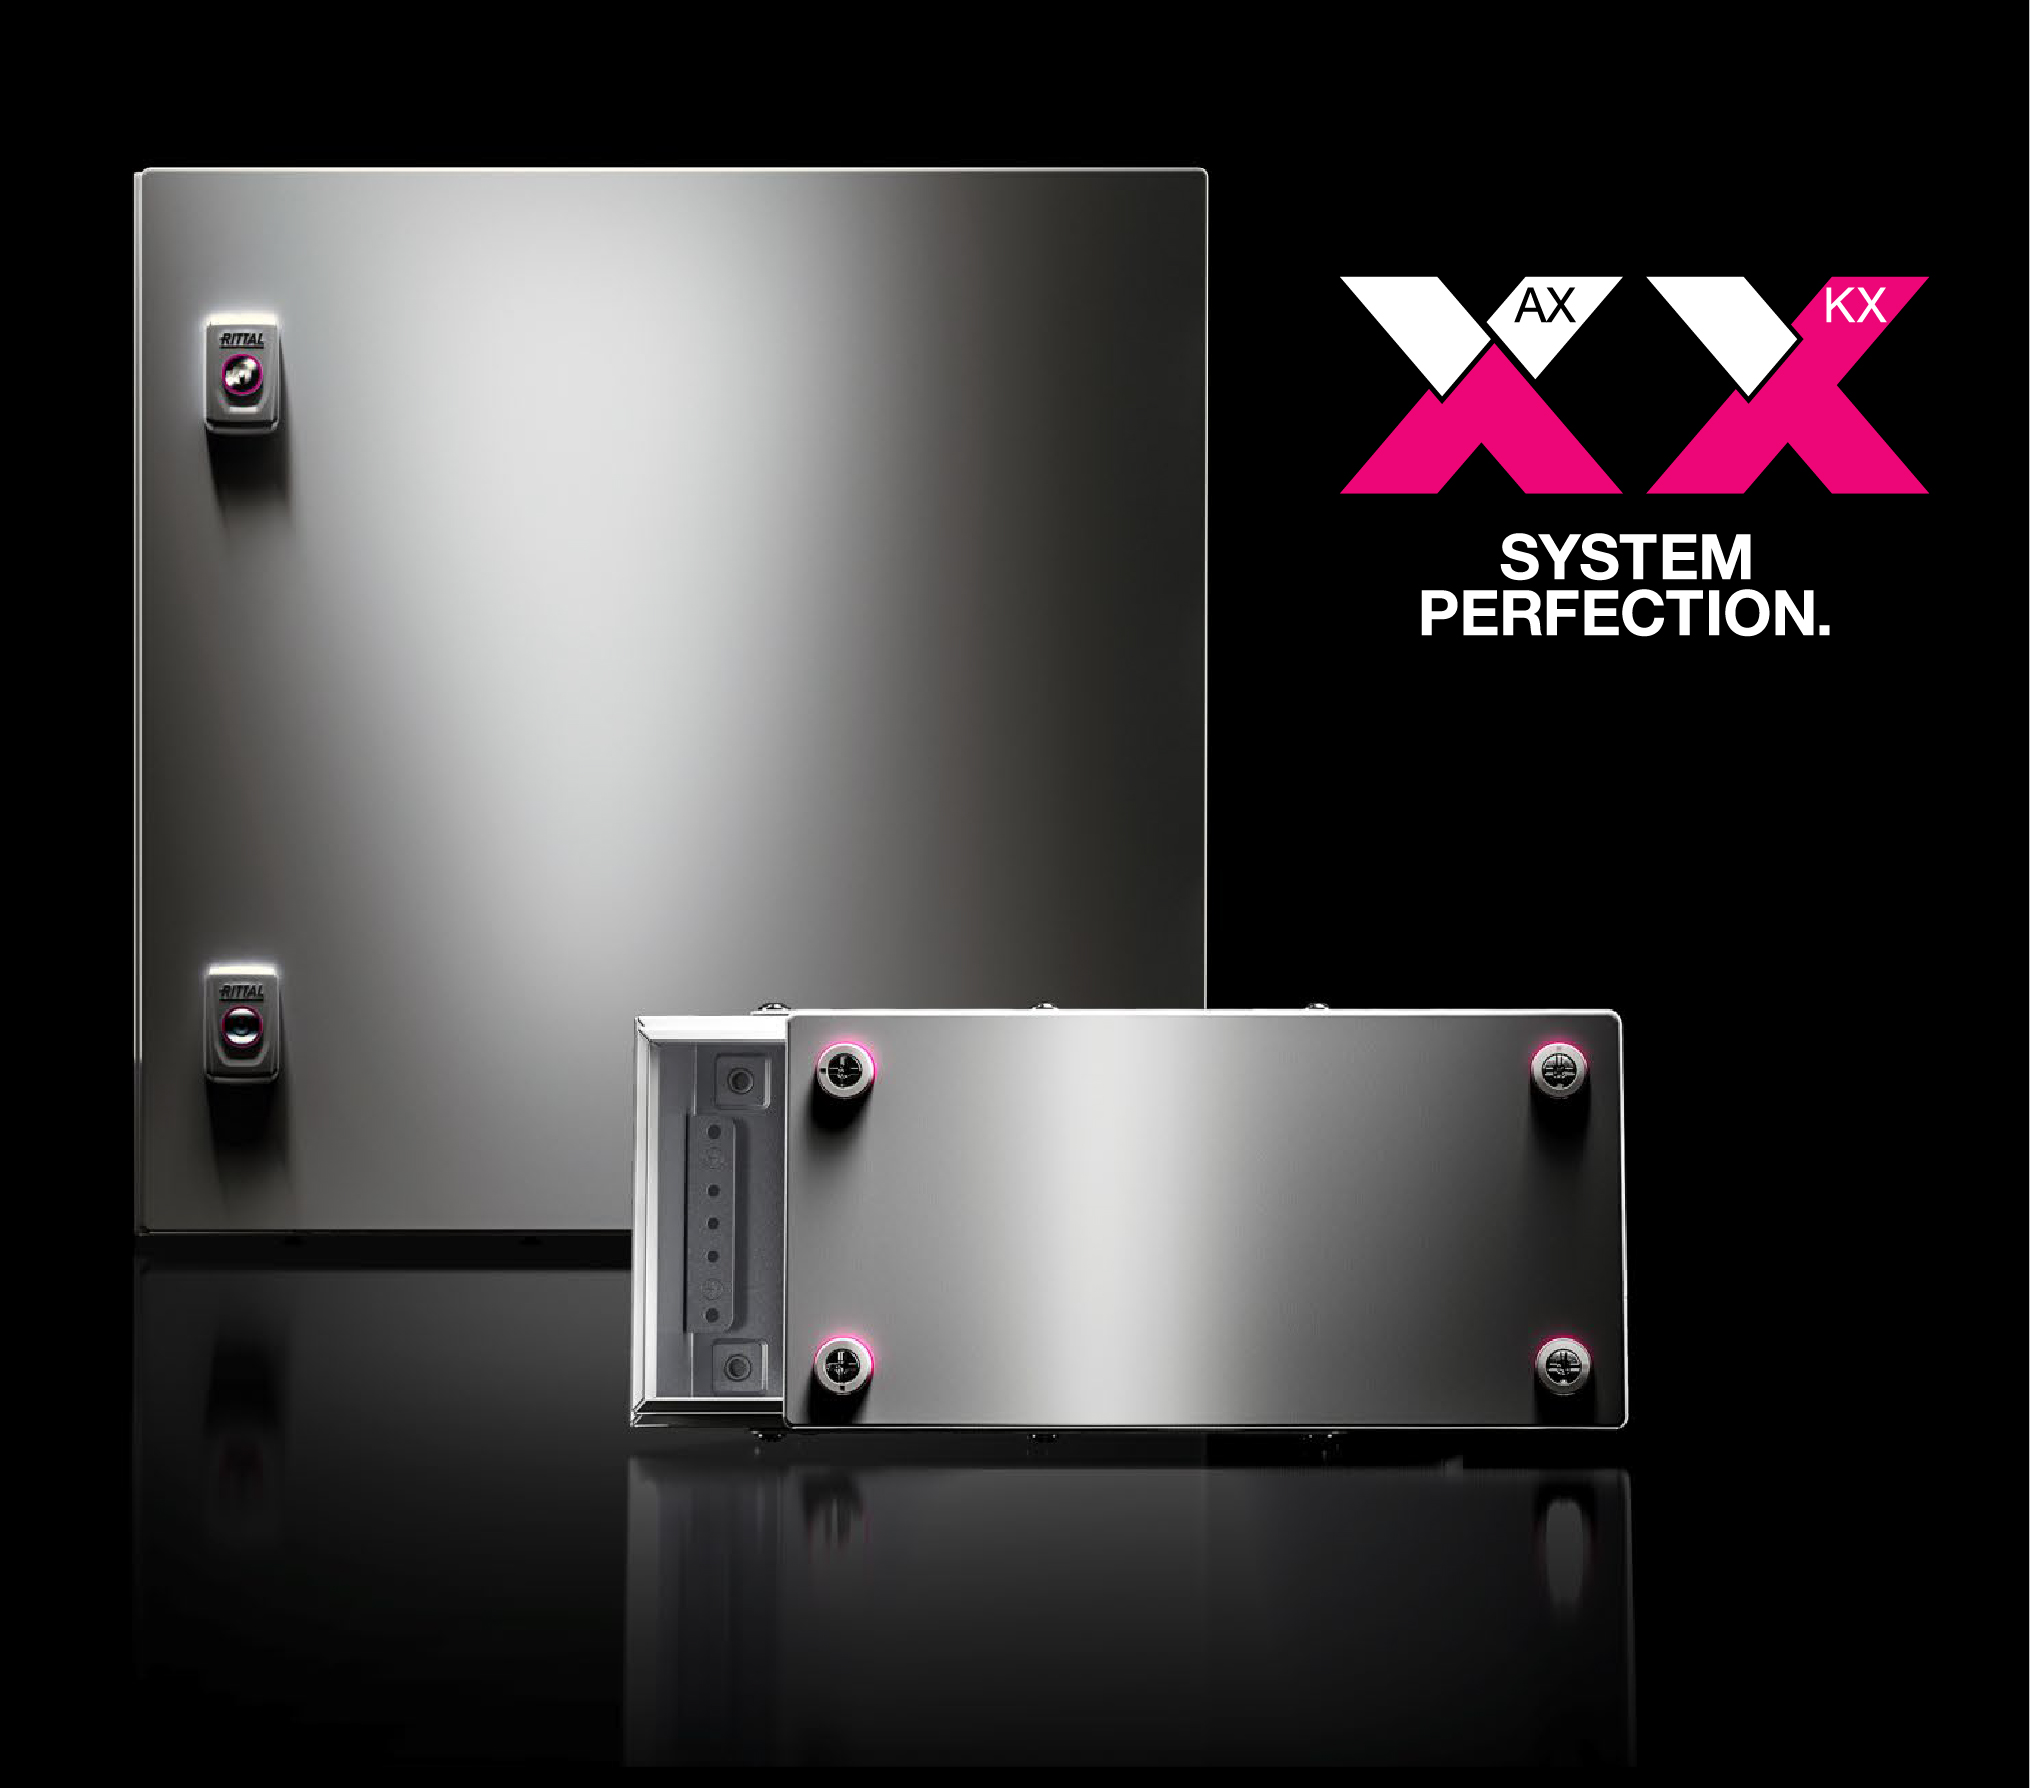 Rittal North America Introduces New AX and KX Enclosures